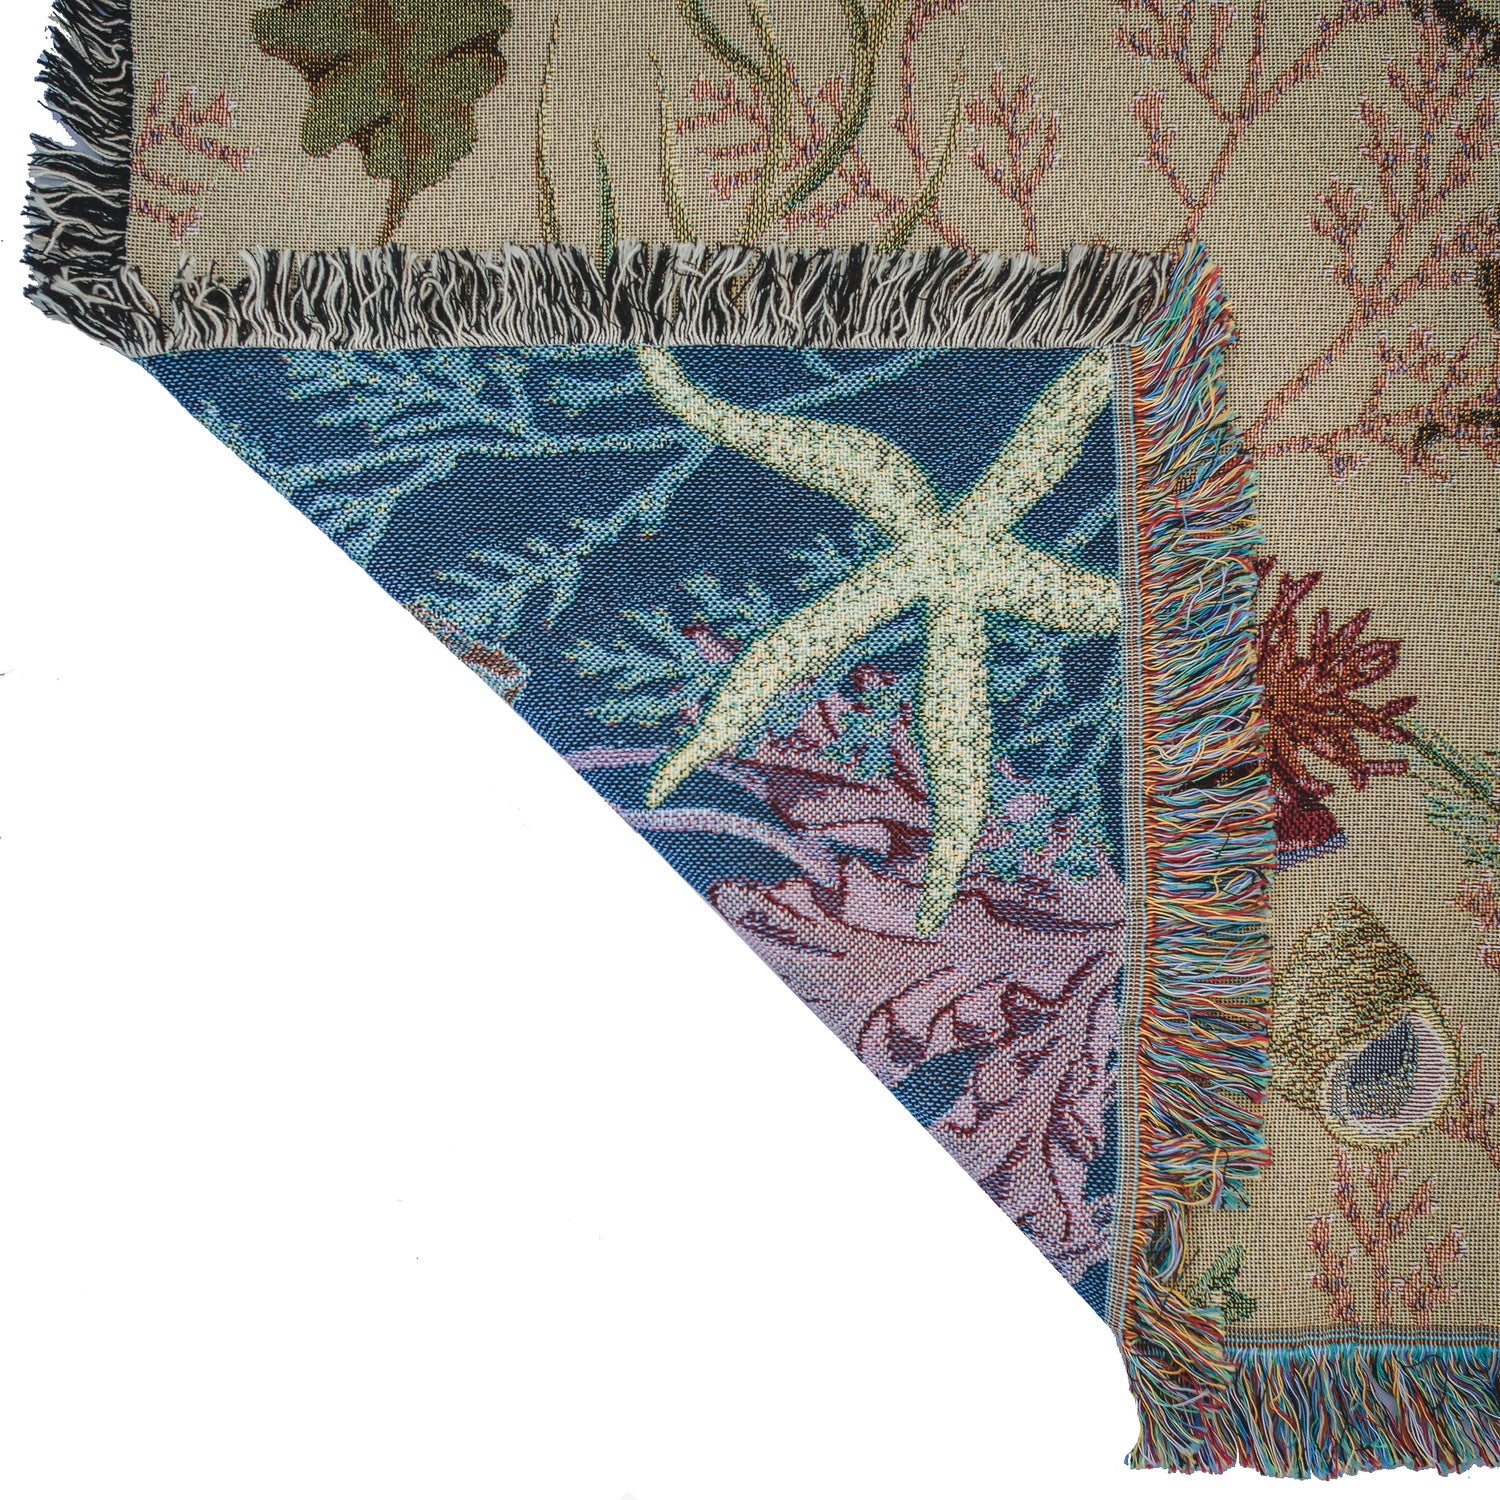 detail of woven blanket with seaweed and starfish details showing beighe front and blue reverse